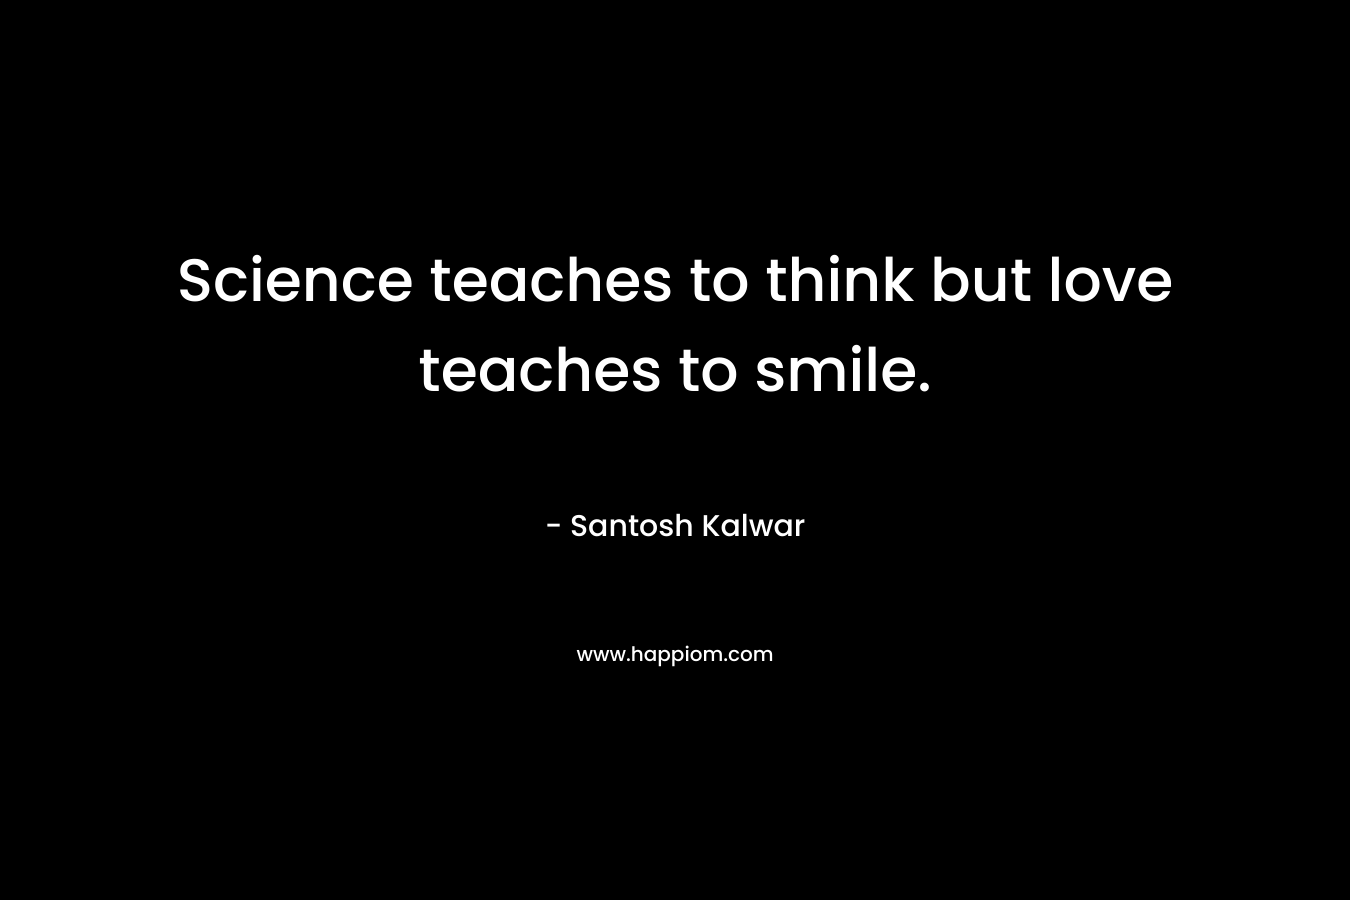 Science teaches to think but love teaches to smile.